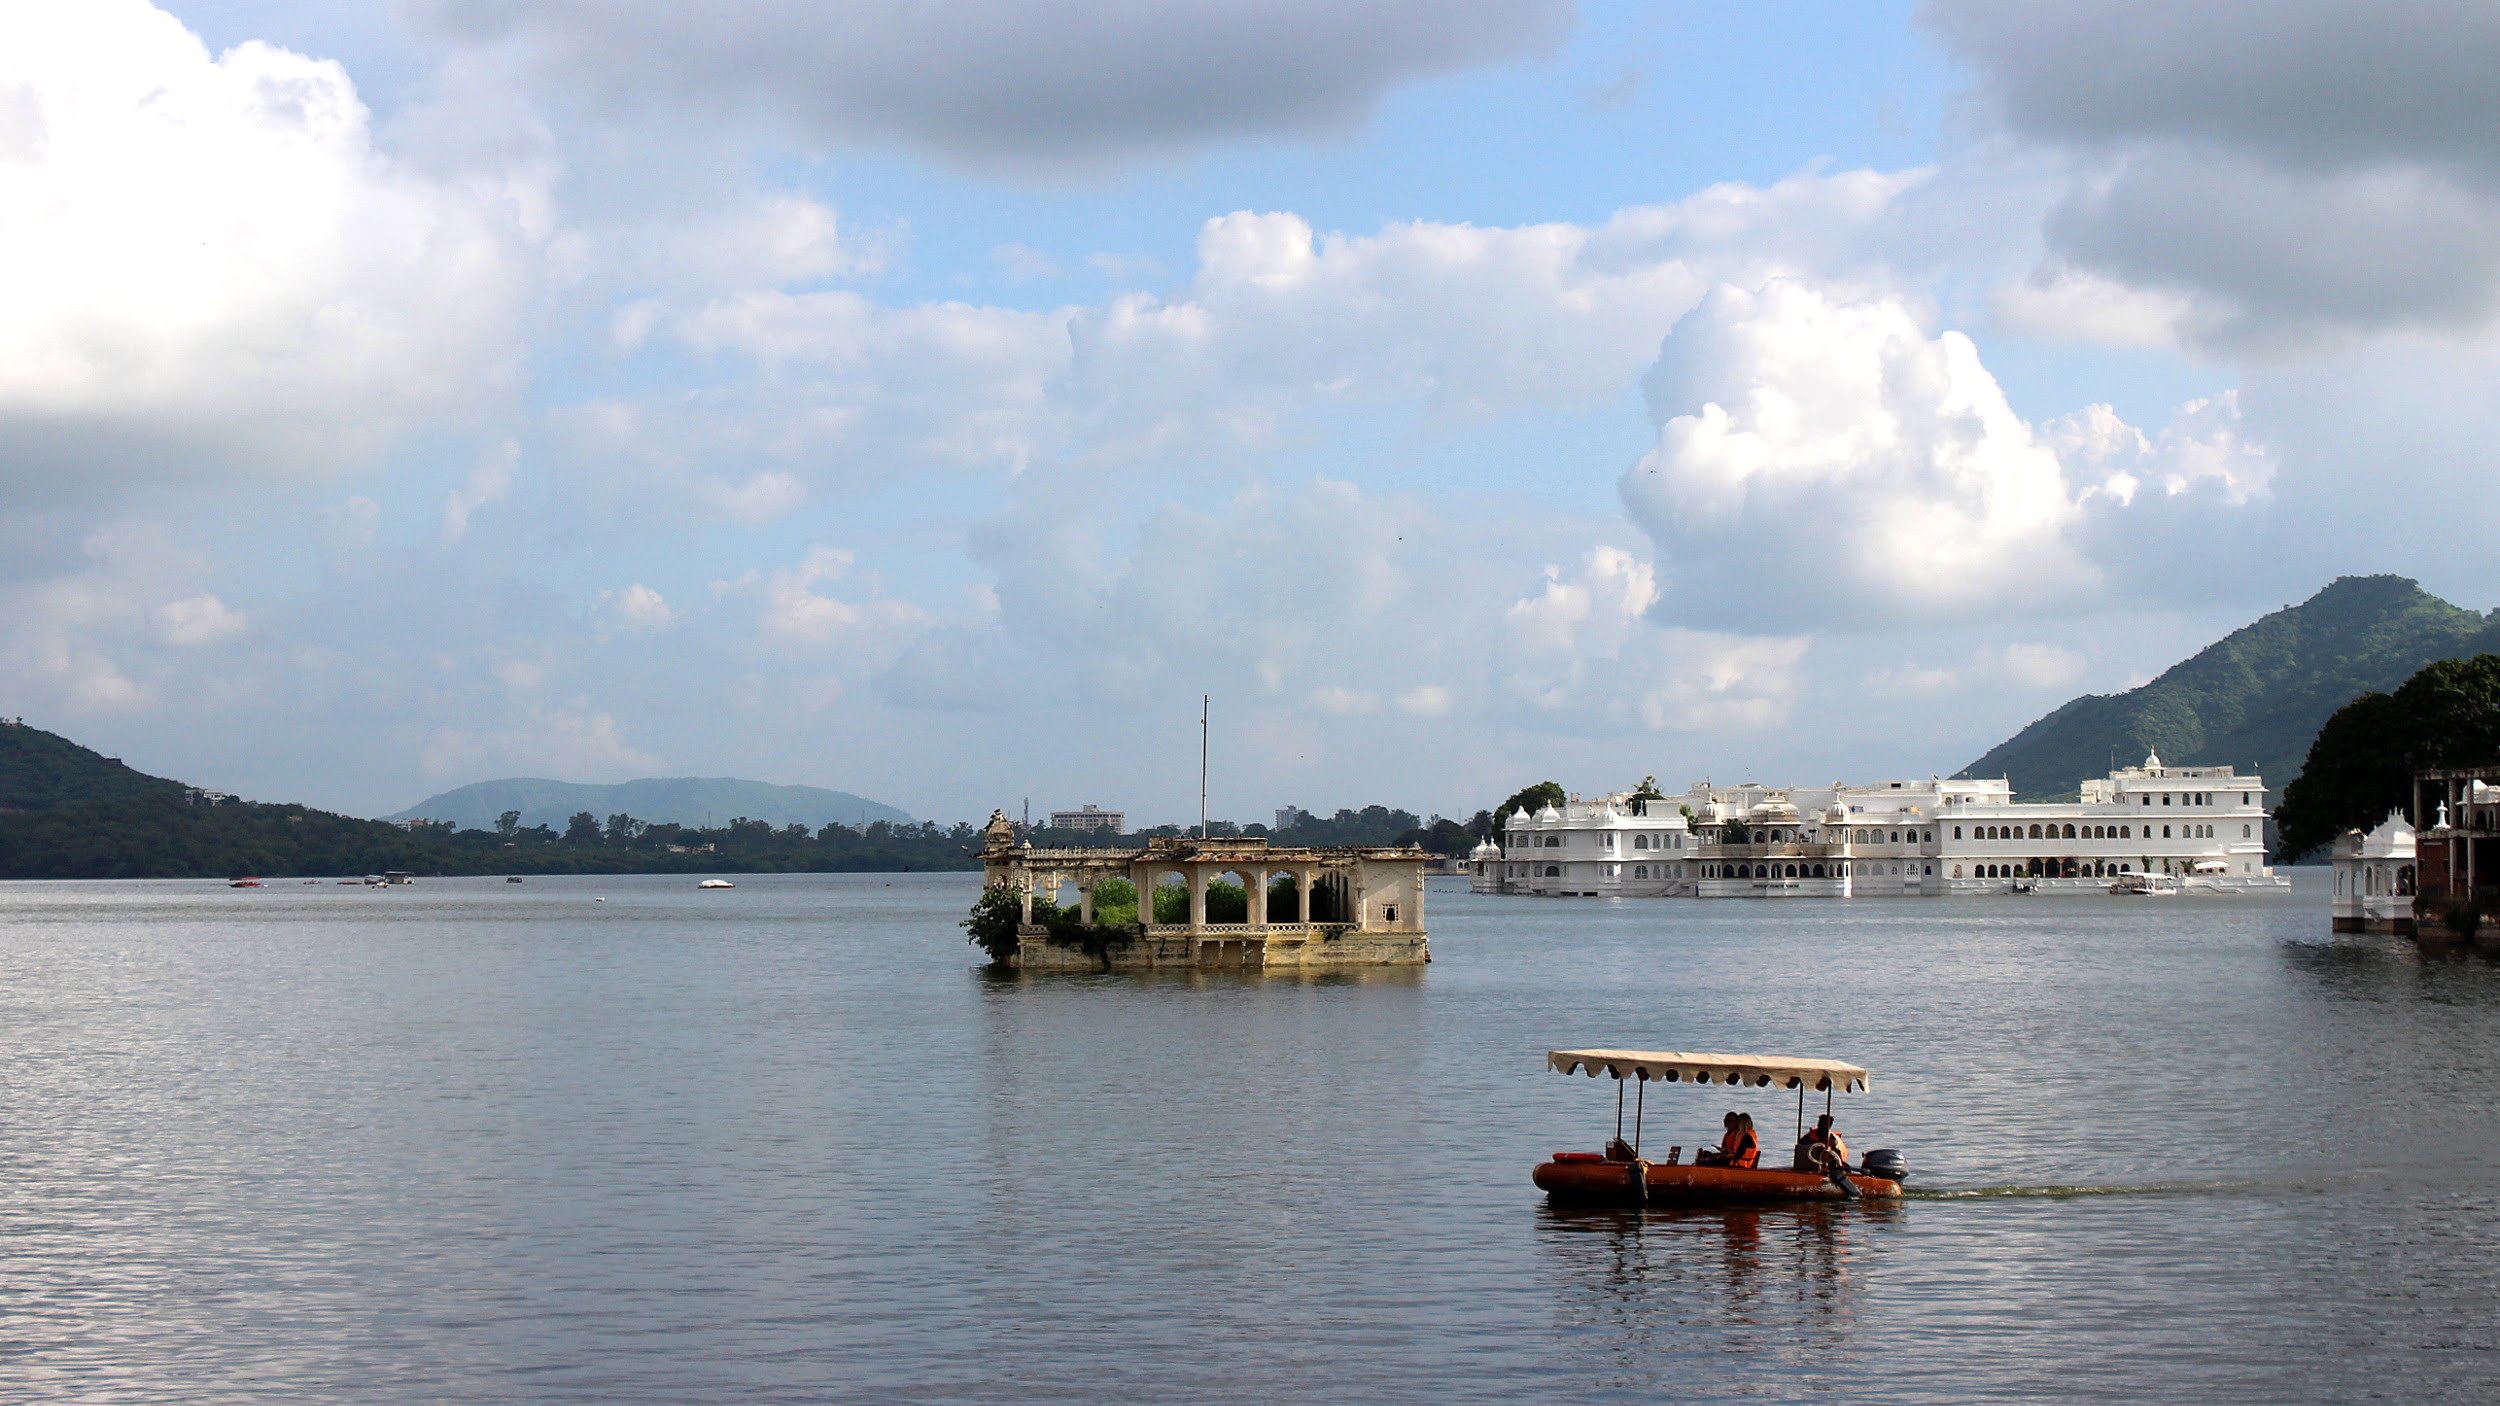 Lake Pichola as seen from the terrace of Rainbow Restaurant.